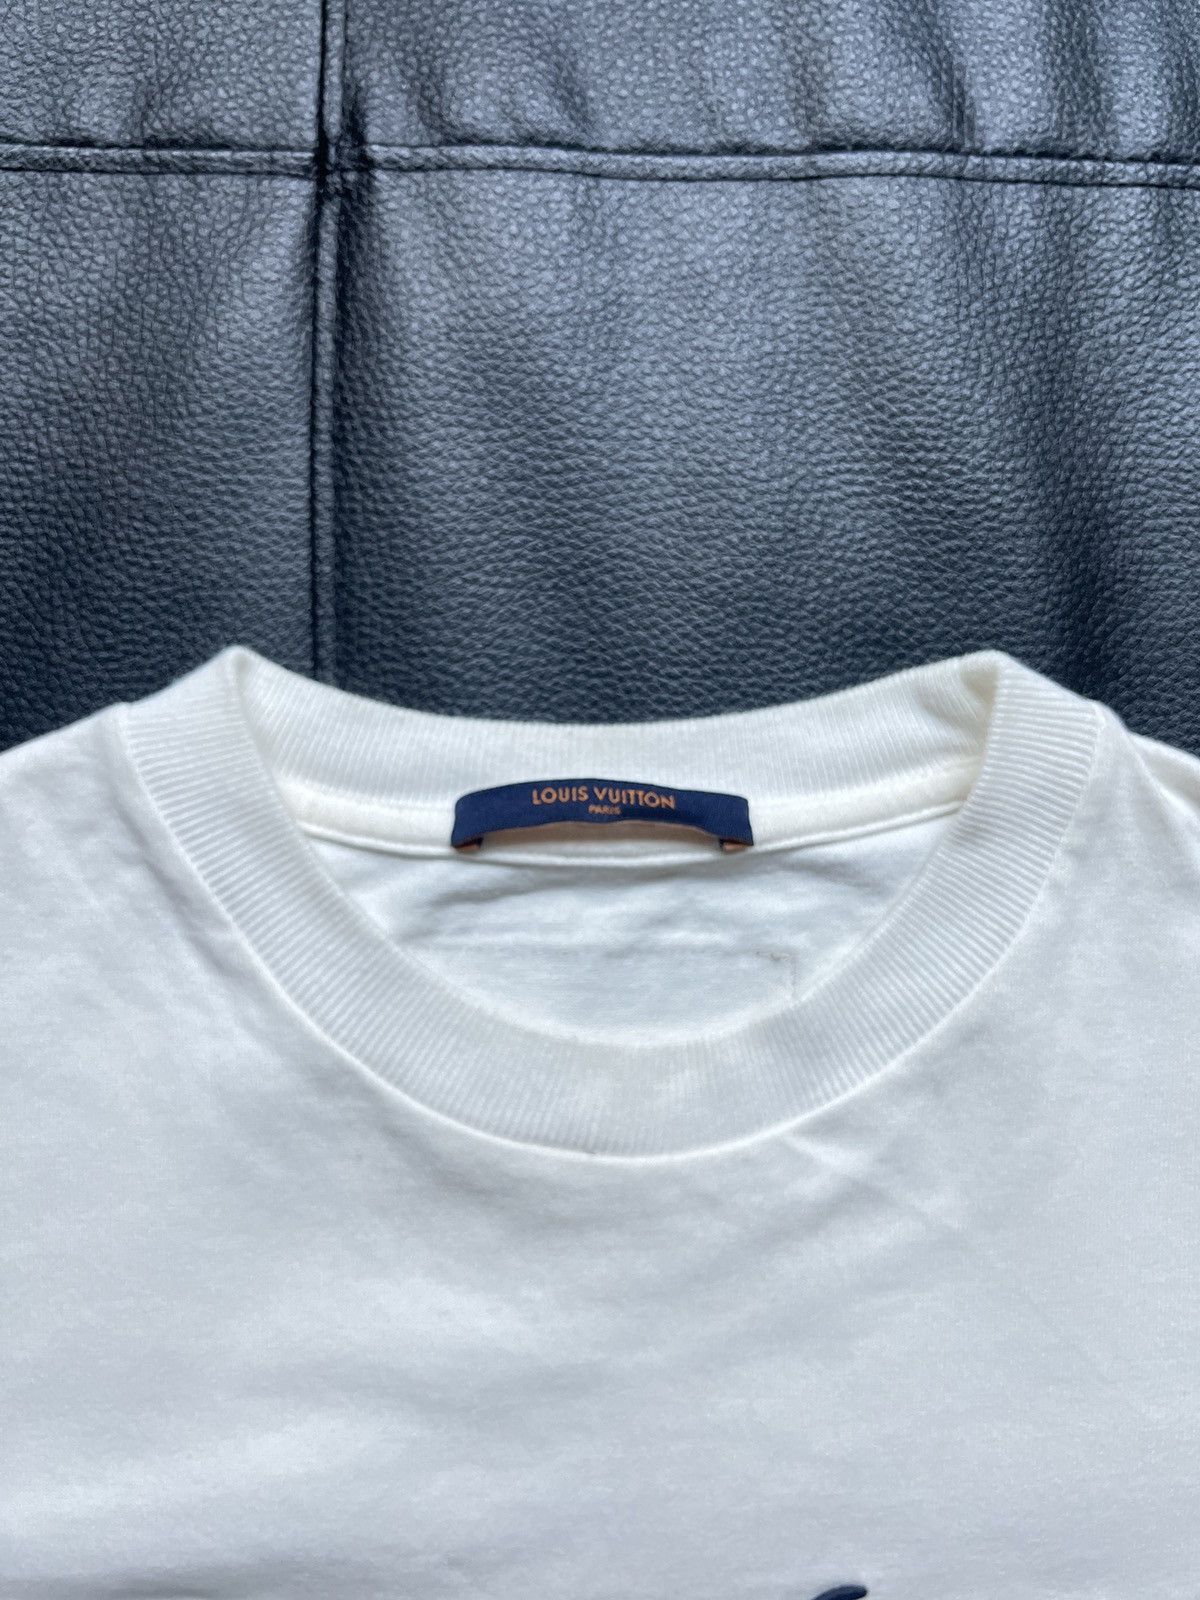 228 LV Paris France Pont Neuf 2018 Tee from Cola + Comparison to